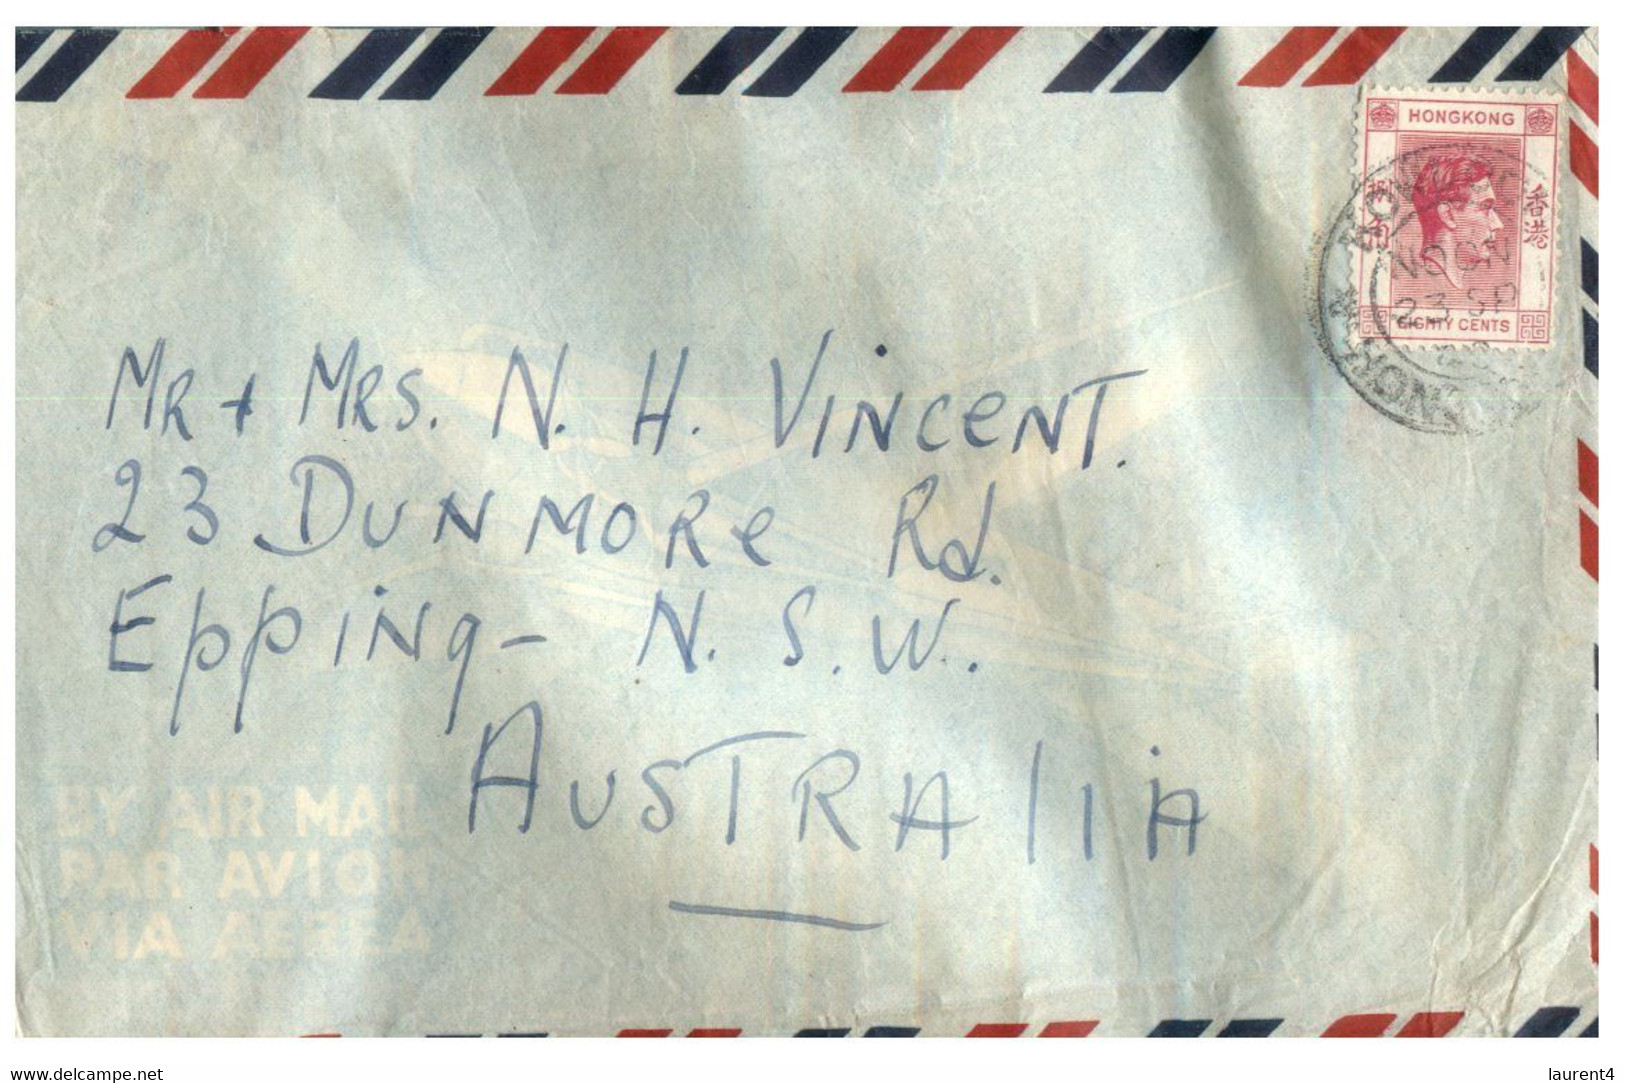 (T 2) Hong Kong Letter Posted To (Epping NSW) Australia In 1949 - Covers & Documents